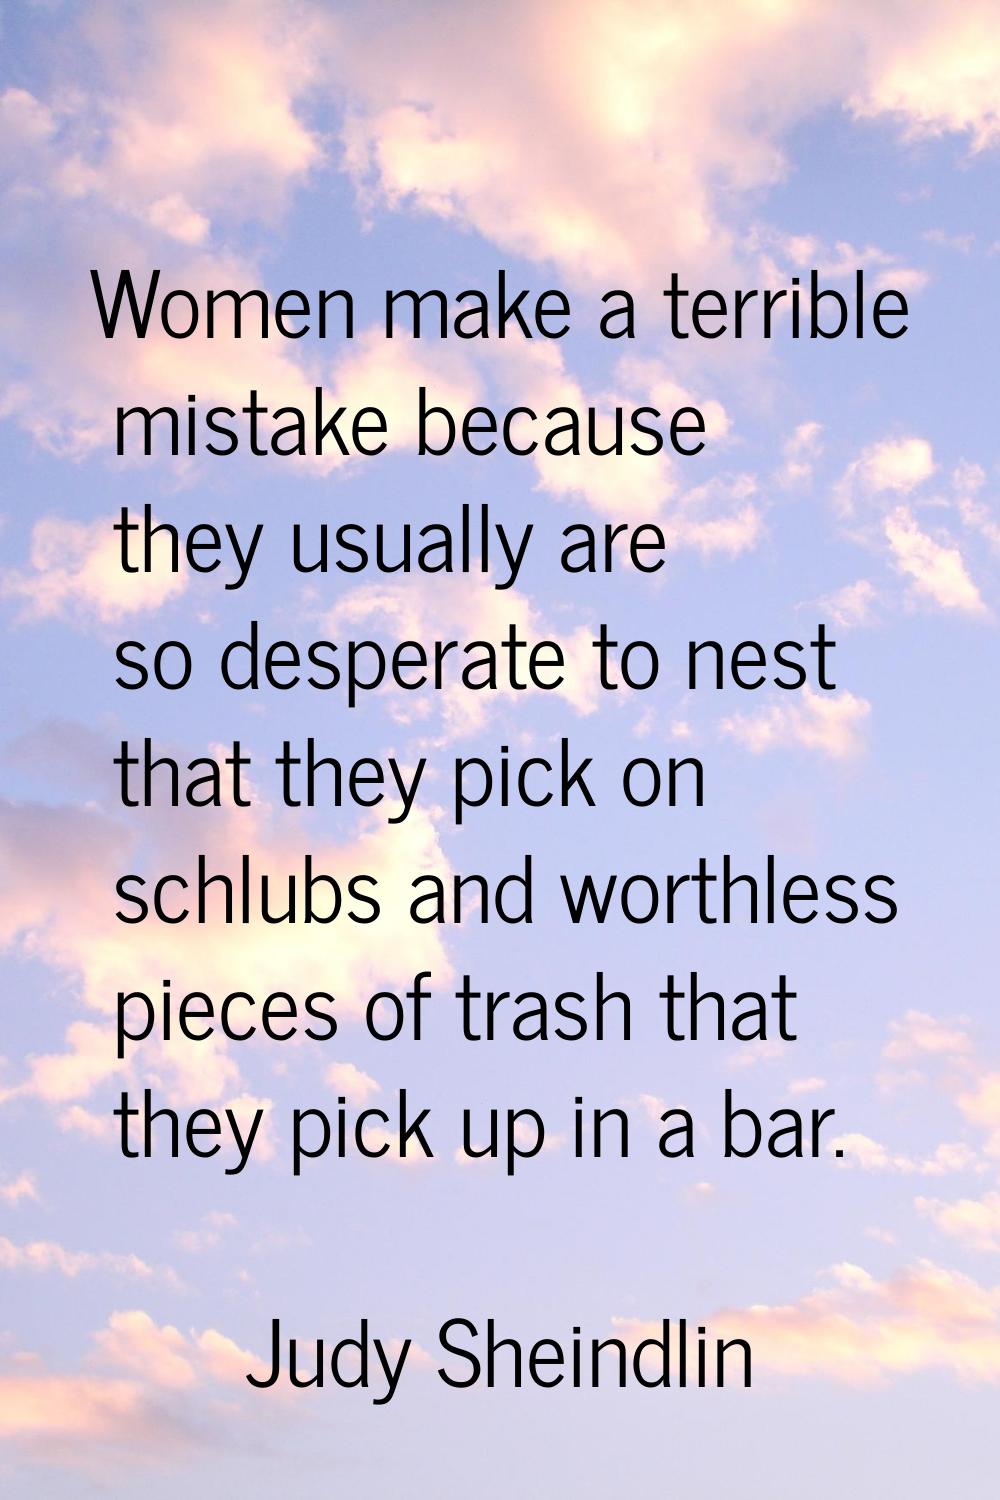 Women make a terrible mistake because they usually are so desperate to nest that they pick on schlu